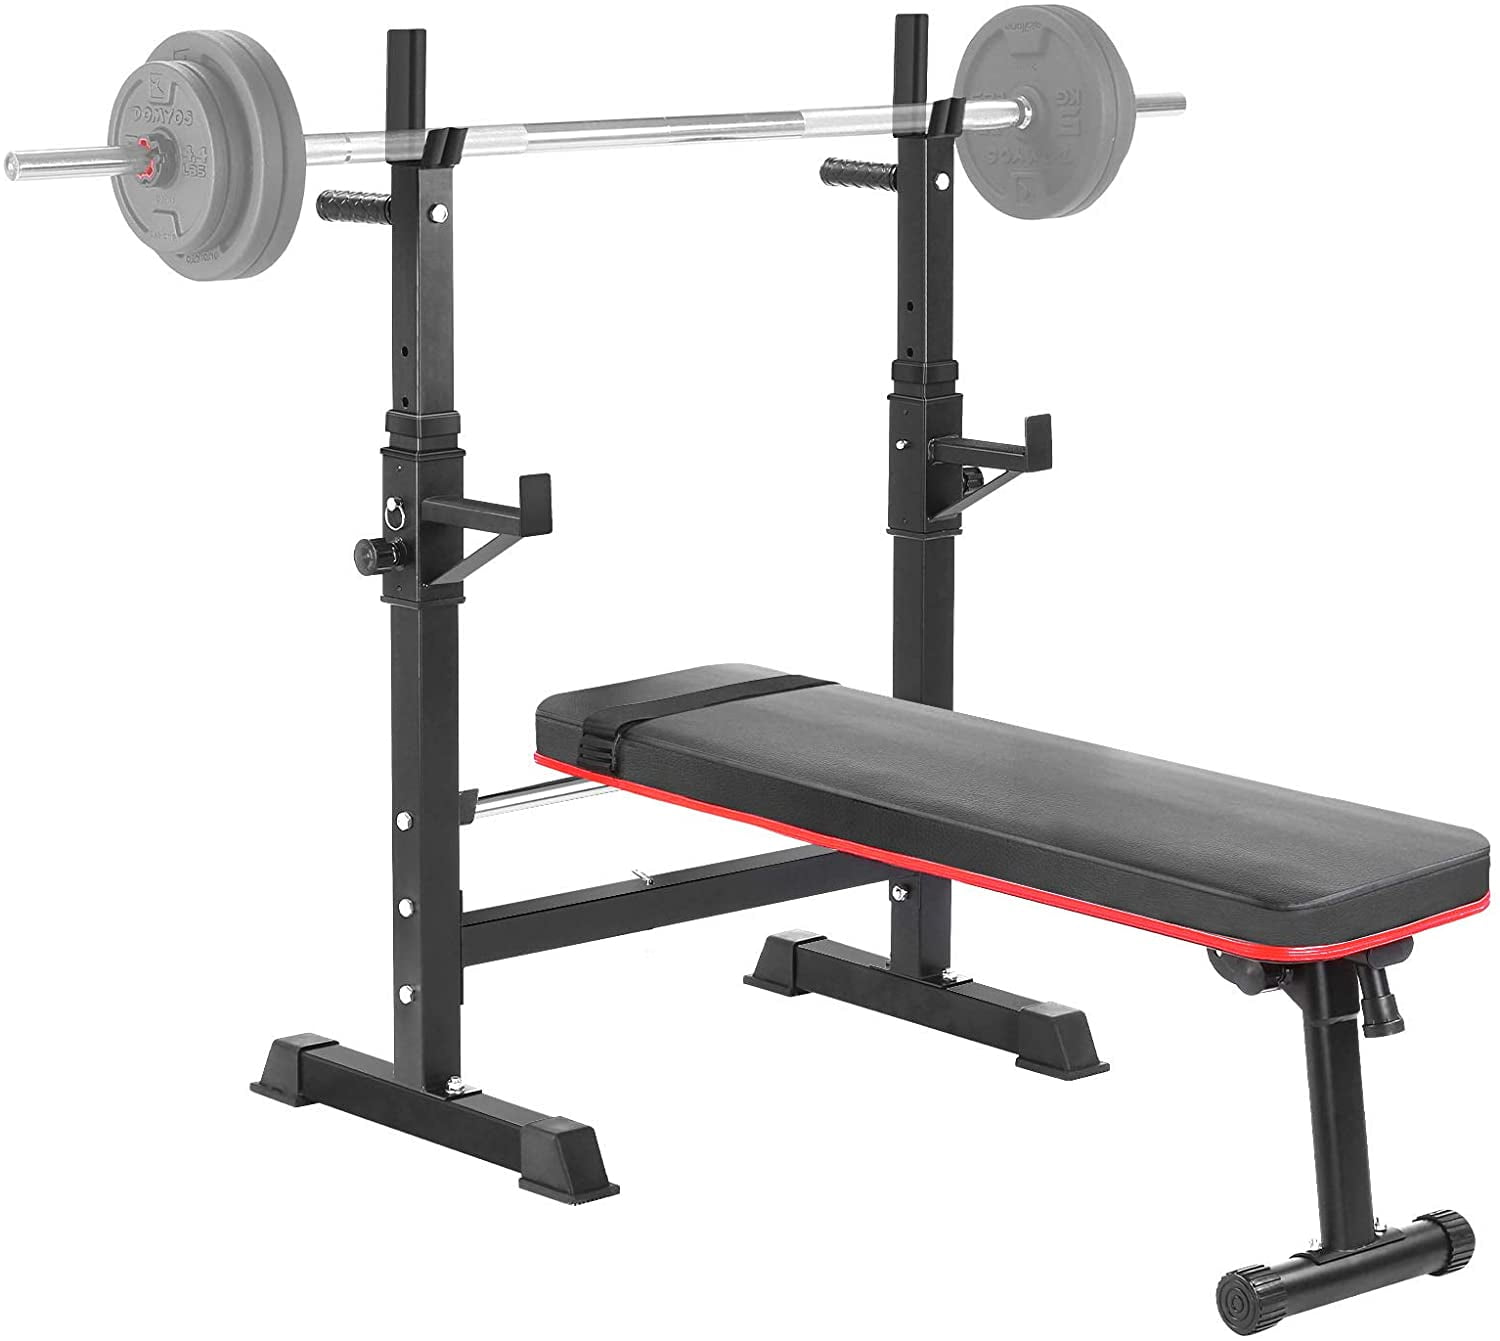 Details about   440lb Load Adjustable/Foldable Utility Bench Weightlifting And Strength Training 